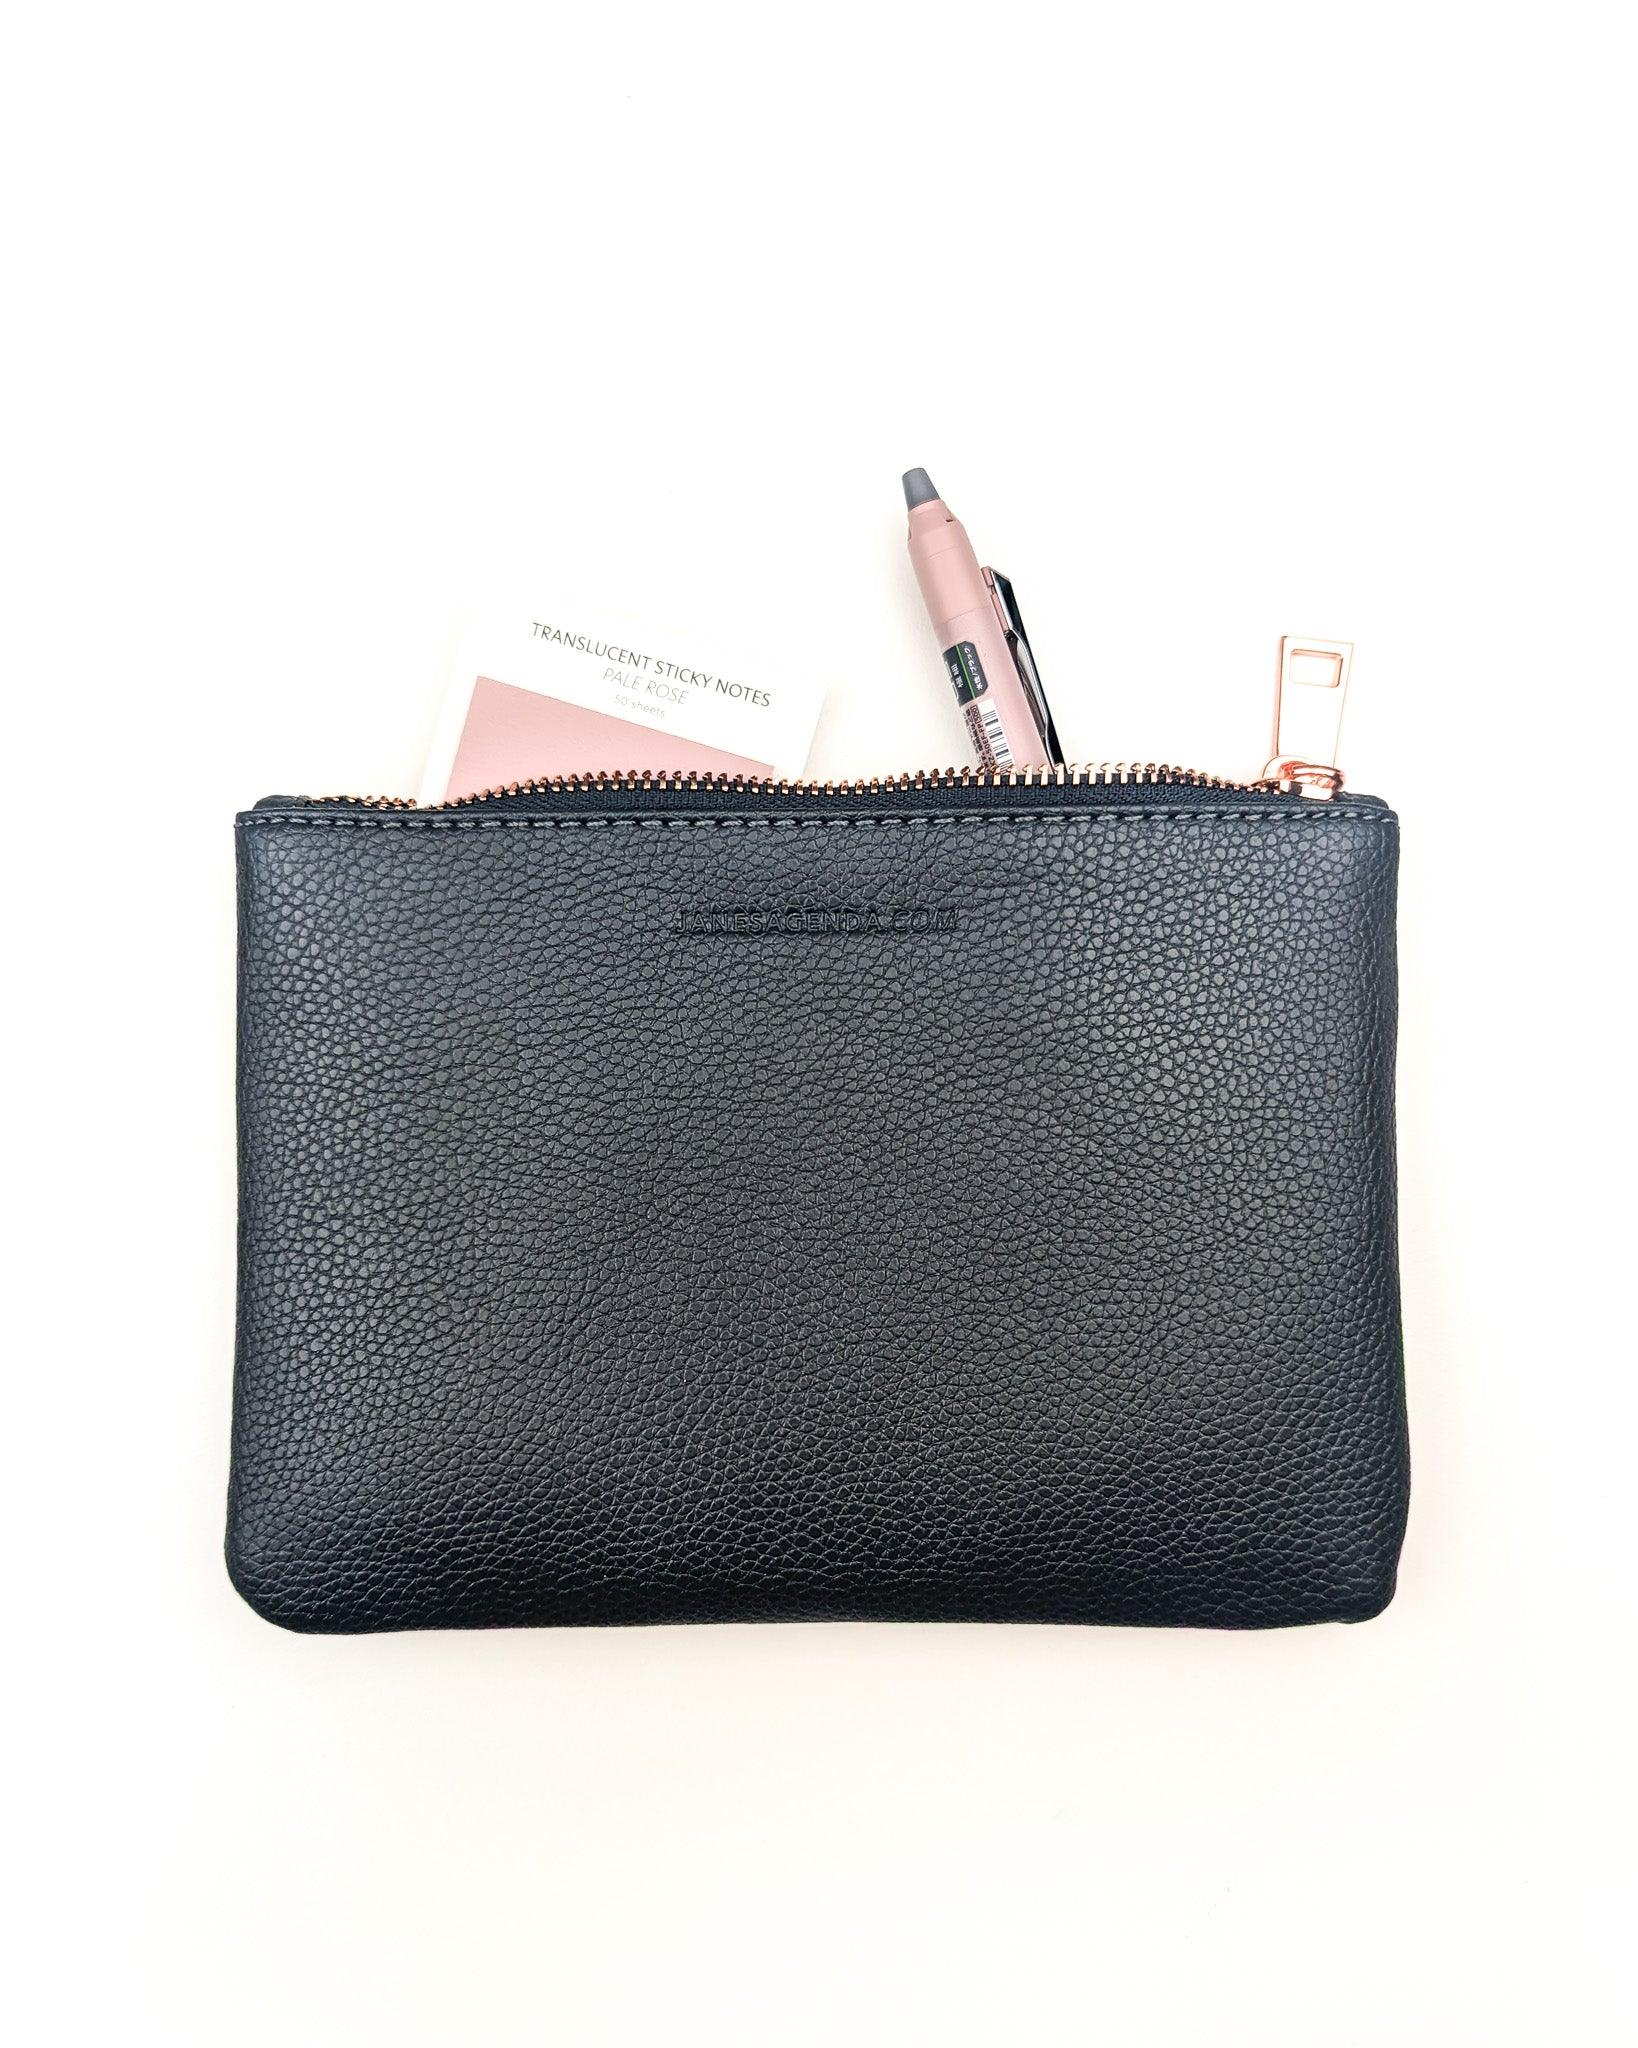 Vegan leather pen and accessories pouch in a soft pebble grain finish with a rose gold metal zipper by Jane's Agenda.